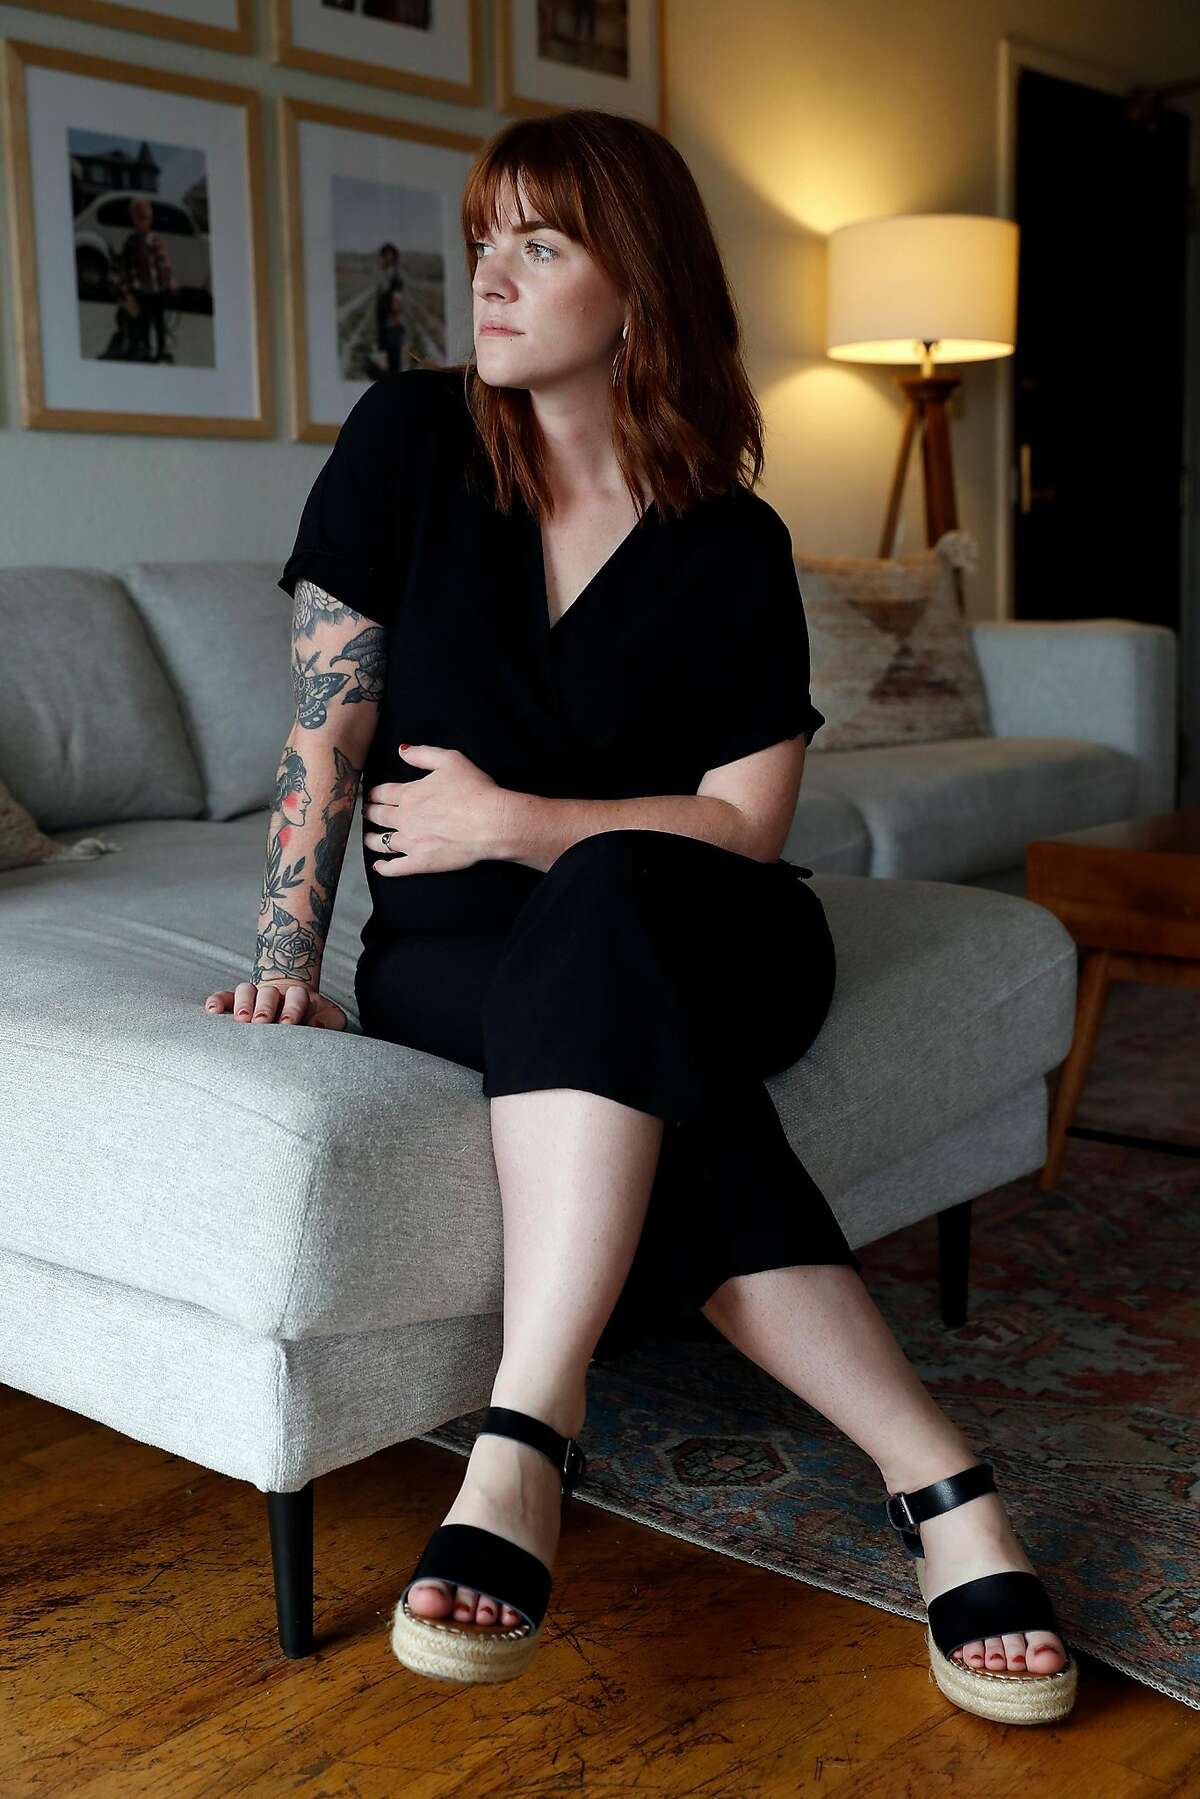 Sam Brancato at their home in San Francisco, Calif., on Thursday, September 17, 2020. Brancato, a pregnant mother of two, is concerned about the effect of wildfire smoke on her unborn child.